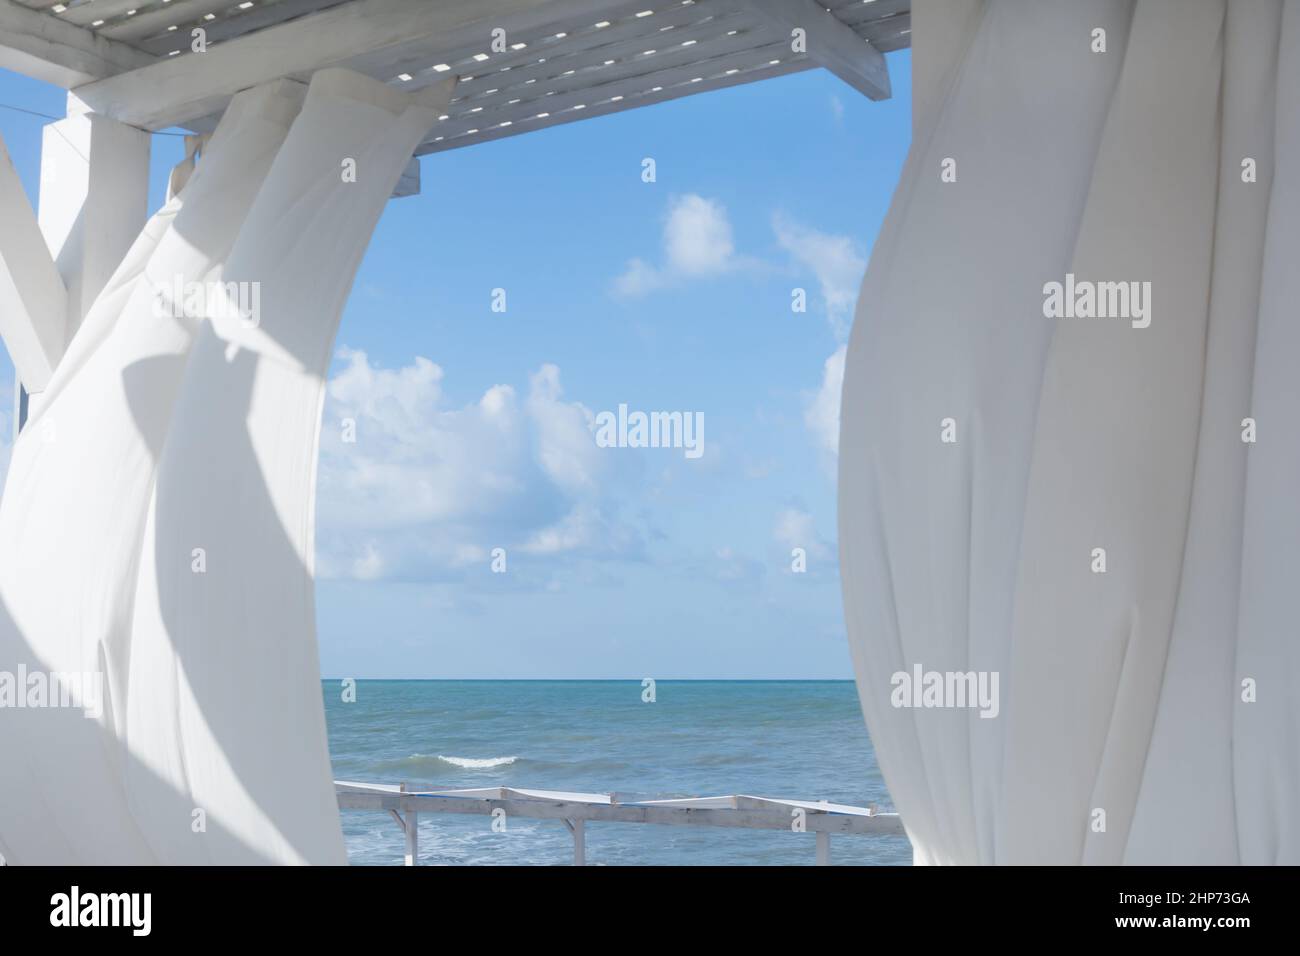 White summer terrace or veranda with transparent curtains. Sea or ocean view. Blurred background, selective focus. Stock Photo